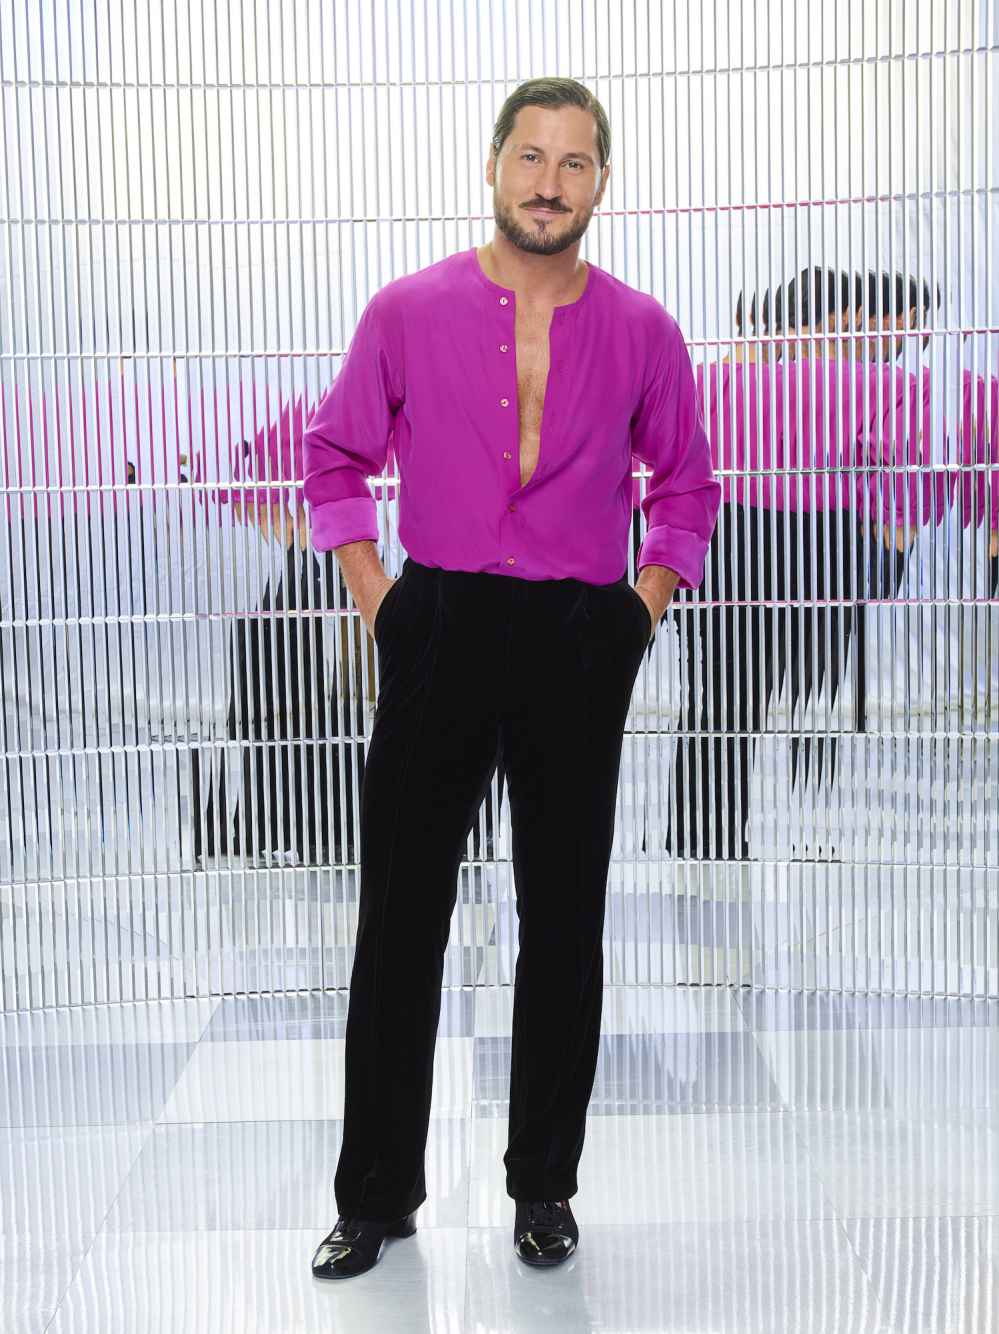 ‘Dancing With the Stars’ Pro Val CHMERKOVSKIY Tests Positive for COVID-19, Out of DWTS Next Week 041